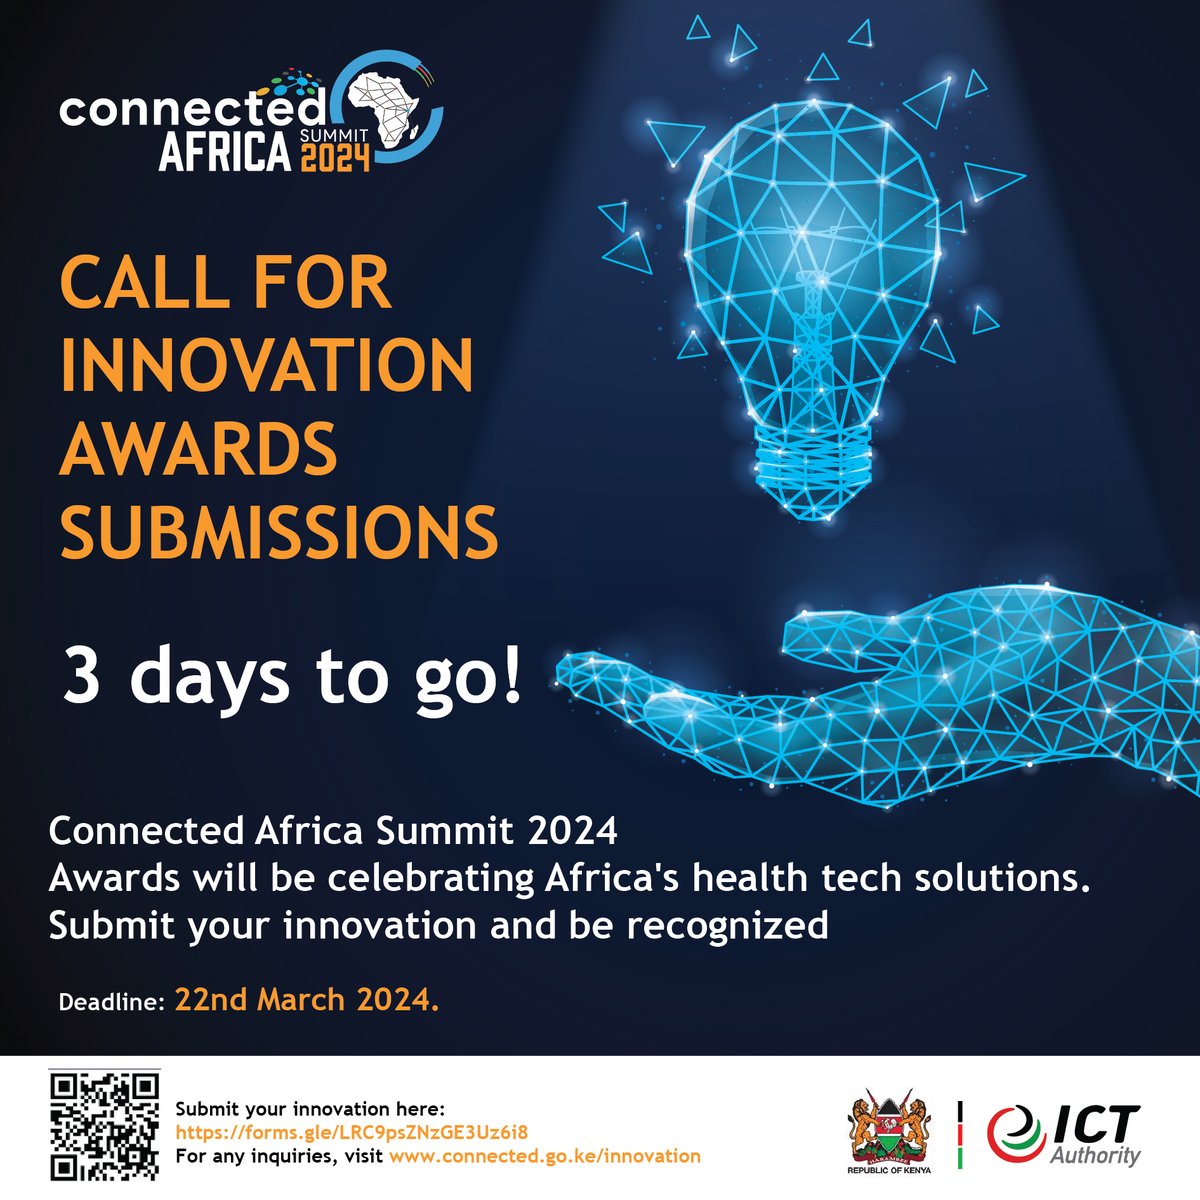 🌍🚀Ready to revolutionize Africa's future? Join us at the #ConnectedAfricanSummit2024 & showcase your groundbreaking innovations! Submit your ideas the deadline & be part of shaping Africa's digital transformation. Don't miss this chance to make a difference! #CAS24 #CAS2024